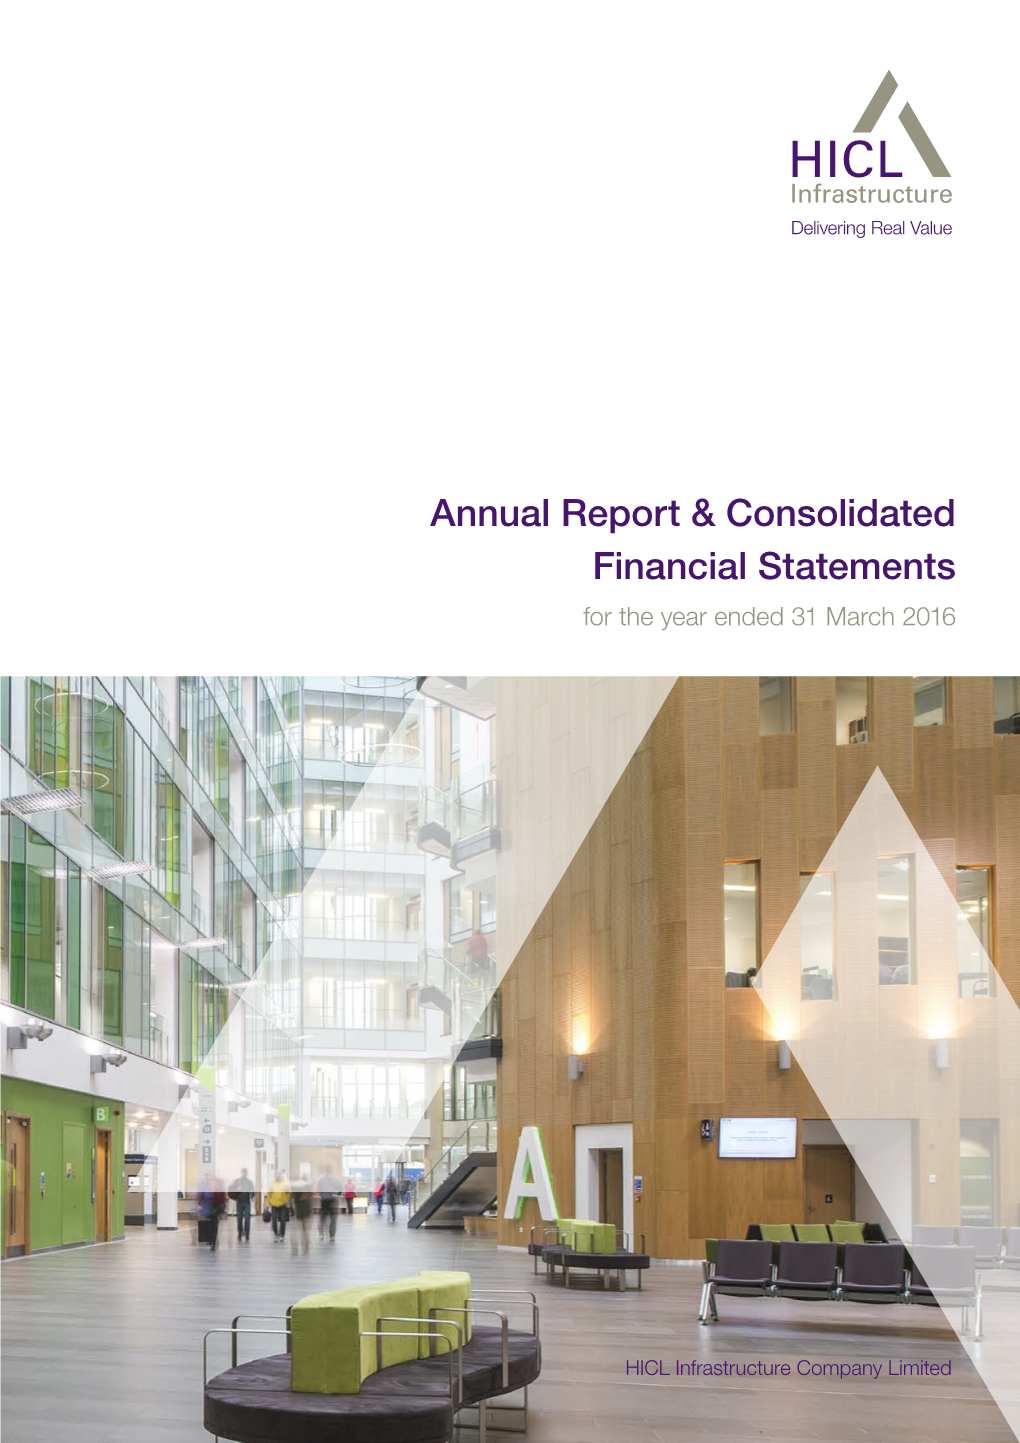 Annual Report & Consolidated Financial Statements